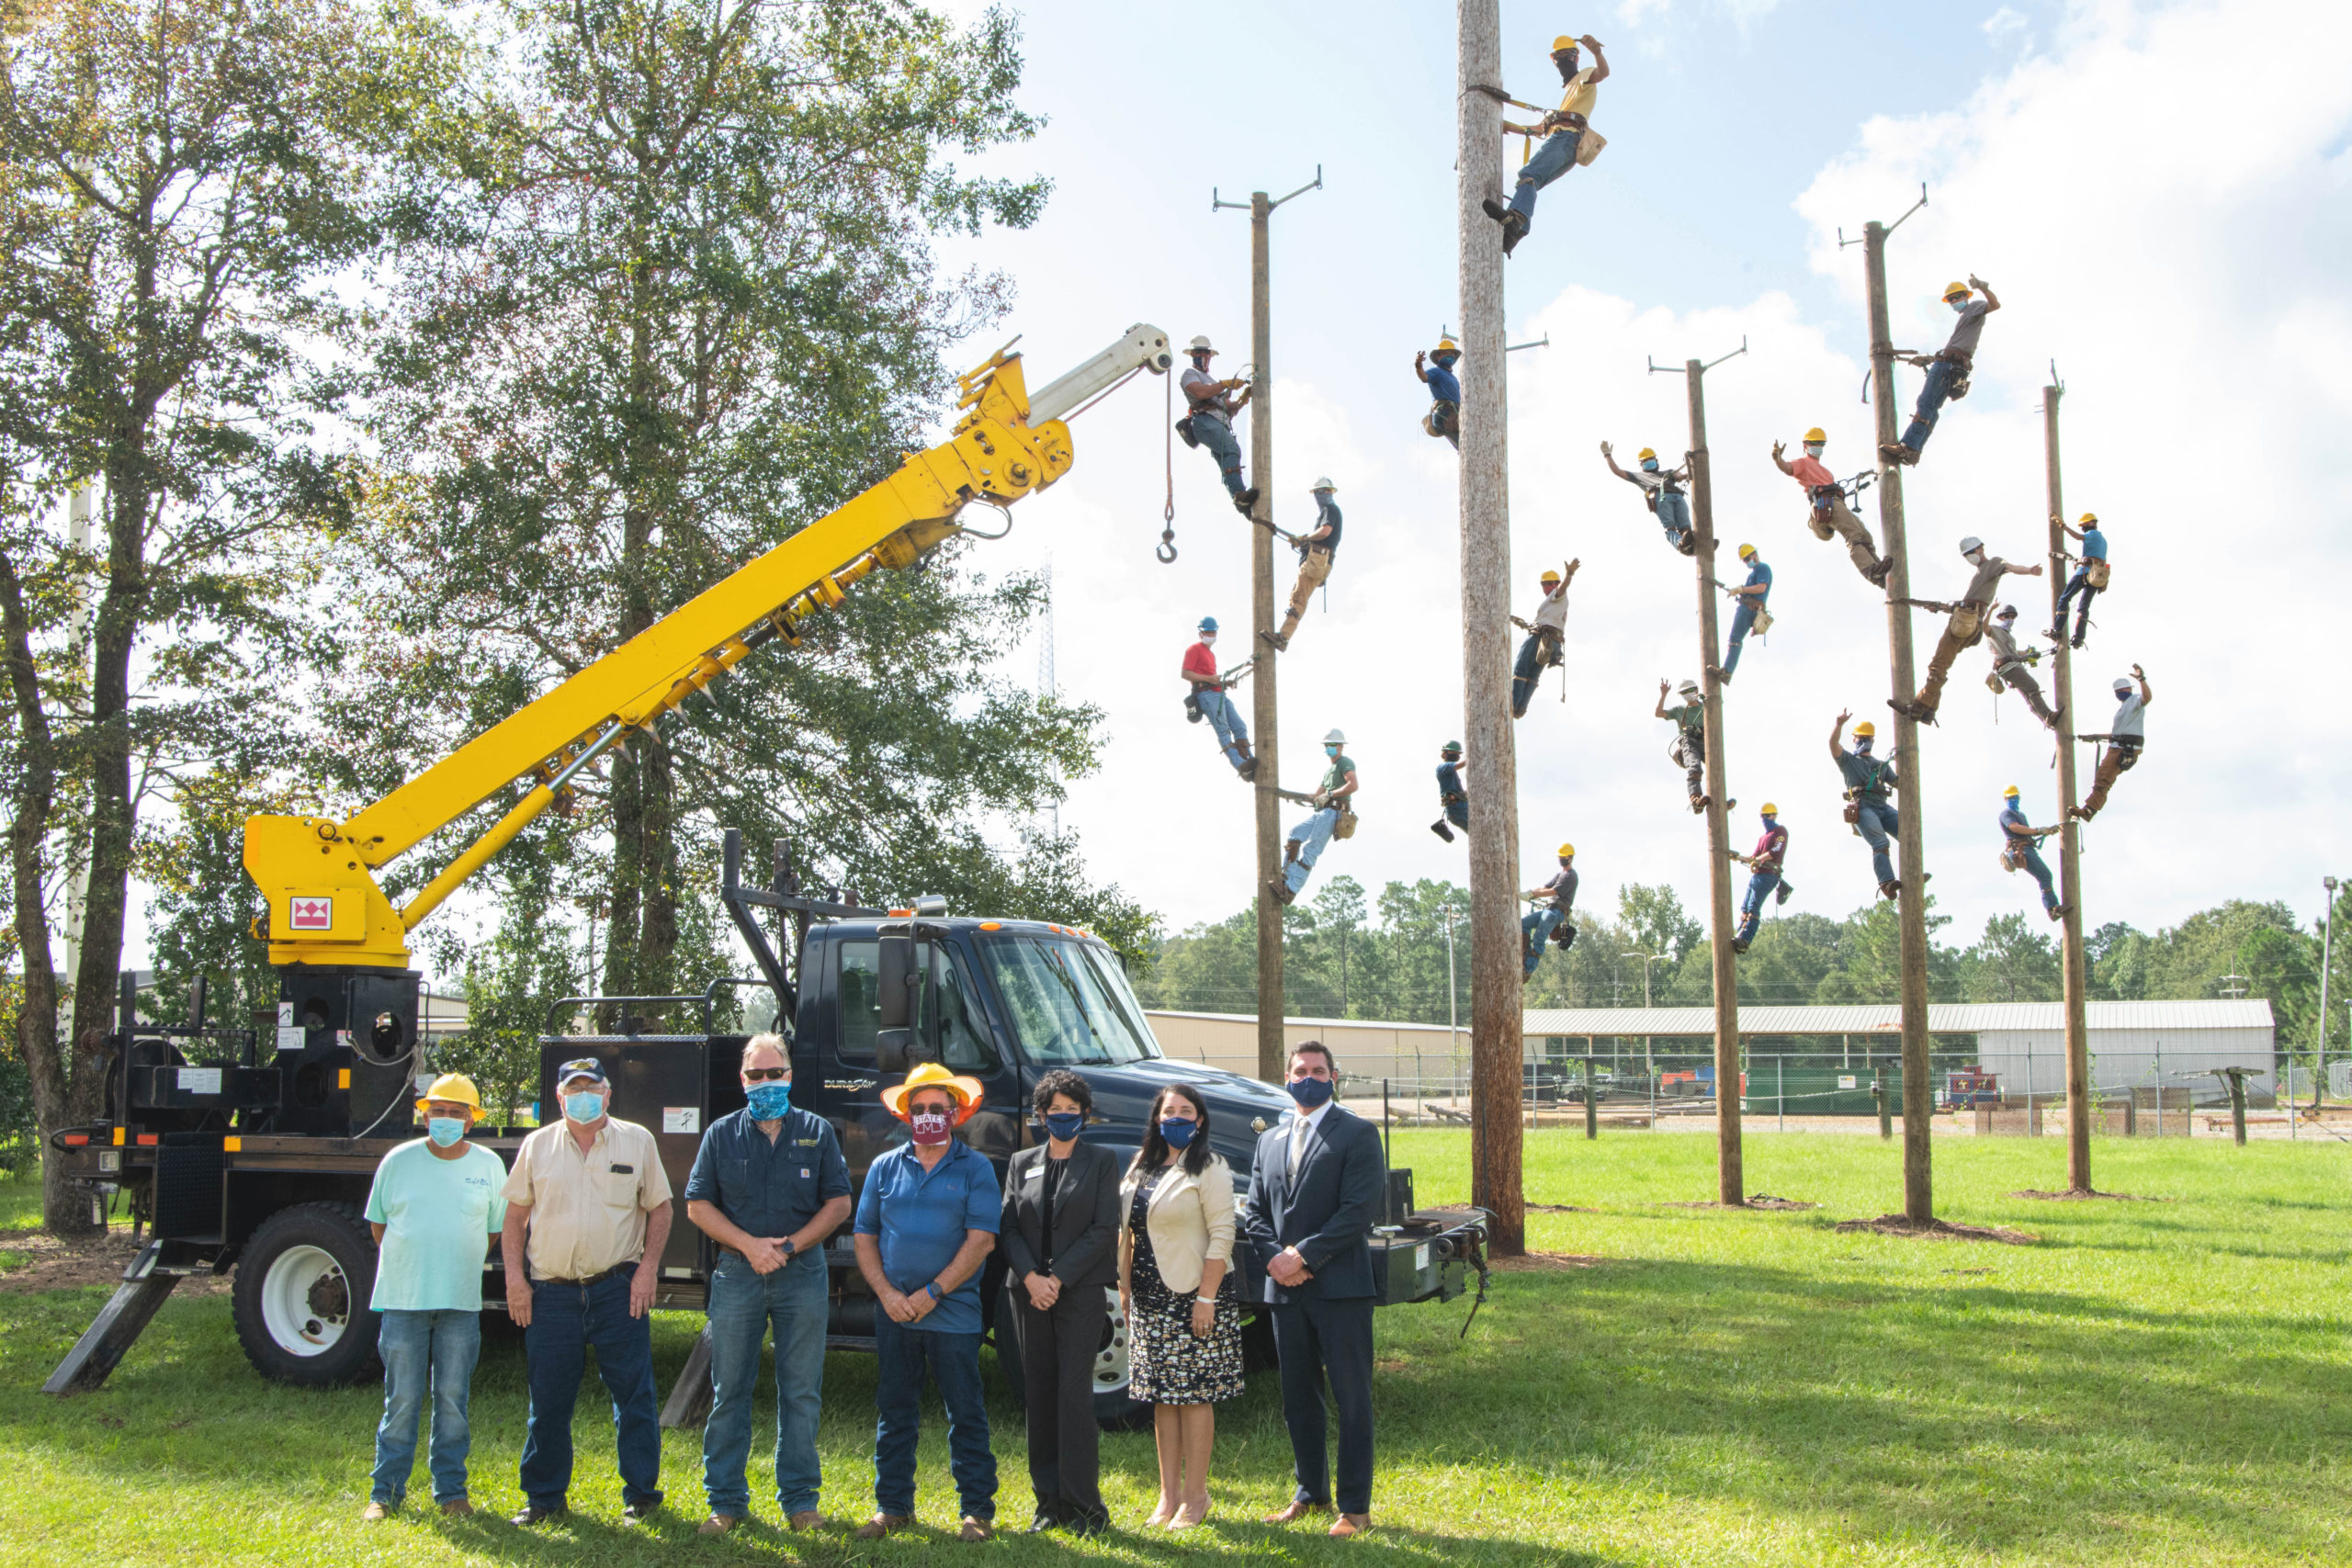 Photo: From left in the forefront are H.L. Ivey, MGCCC Electric Lineman instructor; Jerry Pittman, Pearl River Valley Electric Power Association mechanic; Raymond May, Safety coordinator/manager of Automotive Services for Pearl River Valley Electric Power Association; David Eubanks, MGCCC Electric Lineman instructor; Dr. Lisa Rhodes, administrative dean at the George County Center; Dr. Kady Pietz, associate vice president of Foundation and Alumni Relations; and Dr. Ladd Taylor, vice president of the Perkinston Campus and George County Center. In the background, on poles, are students in the Apprentice Electric Lineman program at MGCCC’s George County Center.